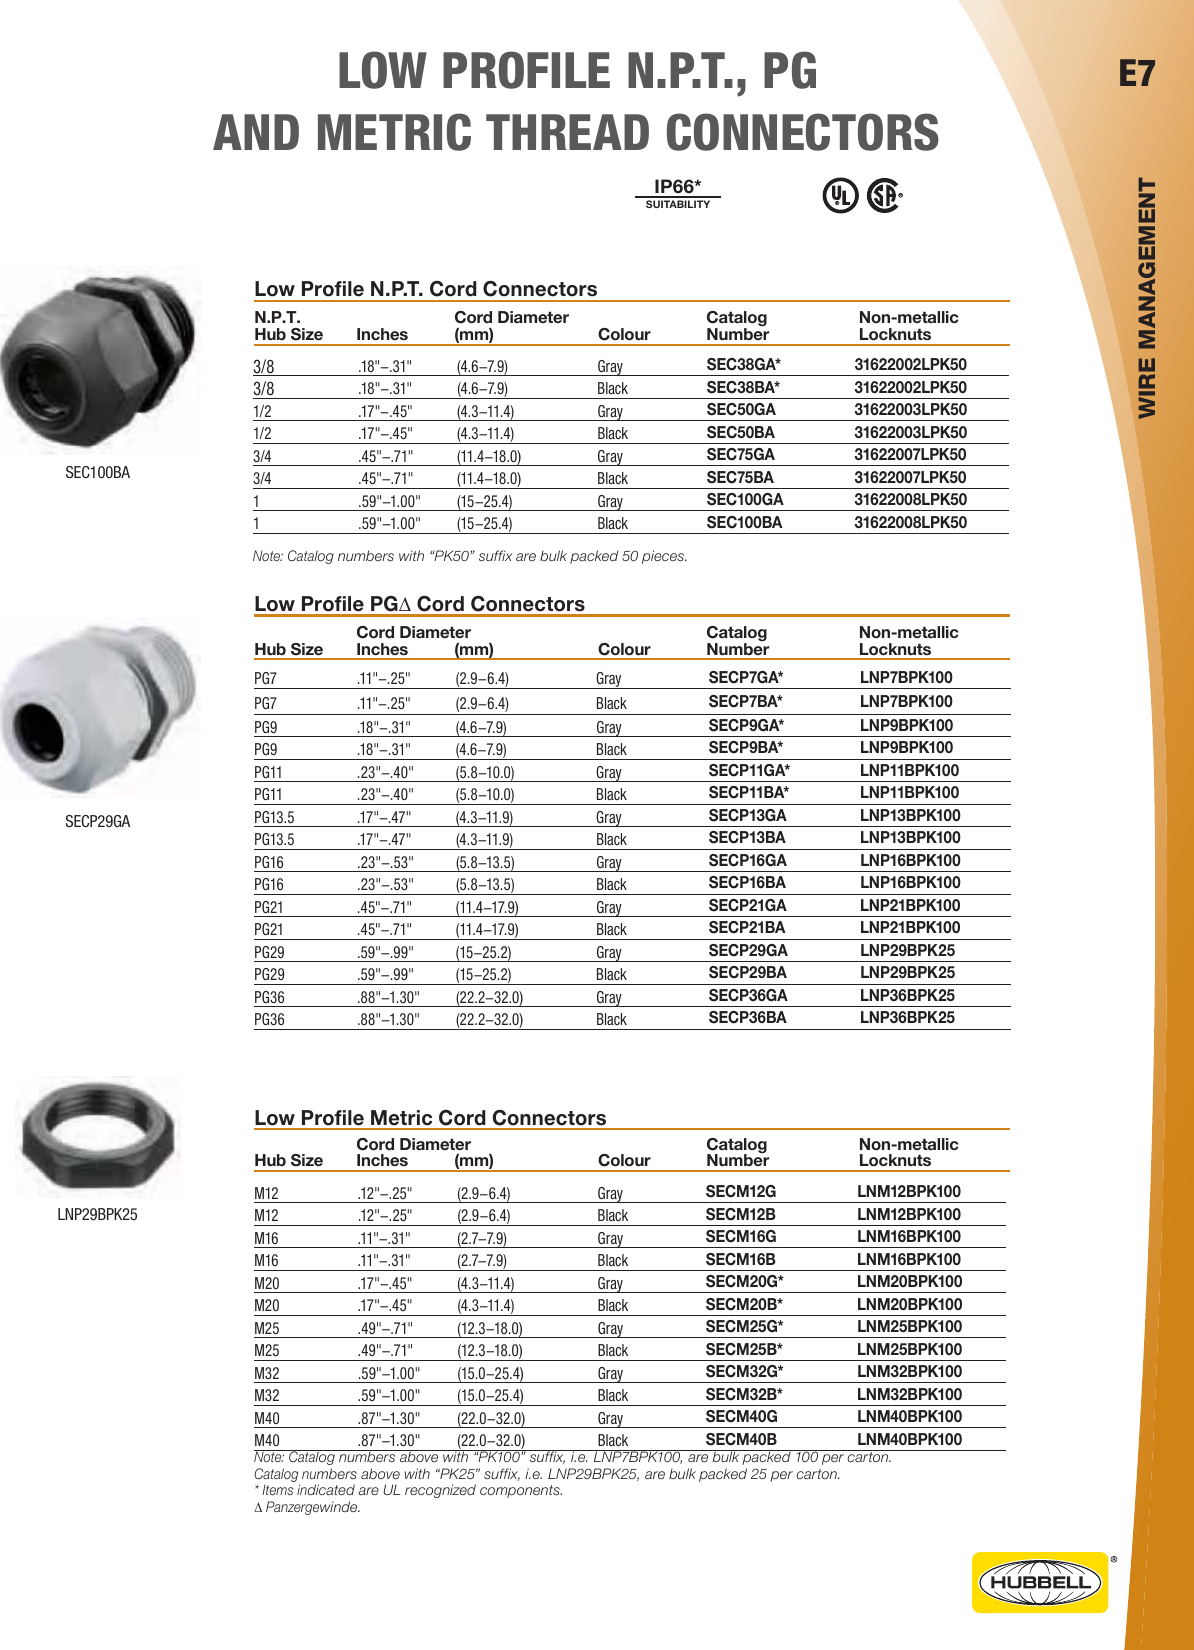 Page 7 of 12 - 1000439559-Catalog